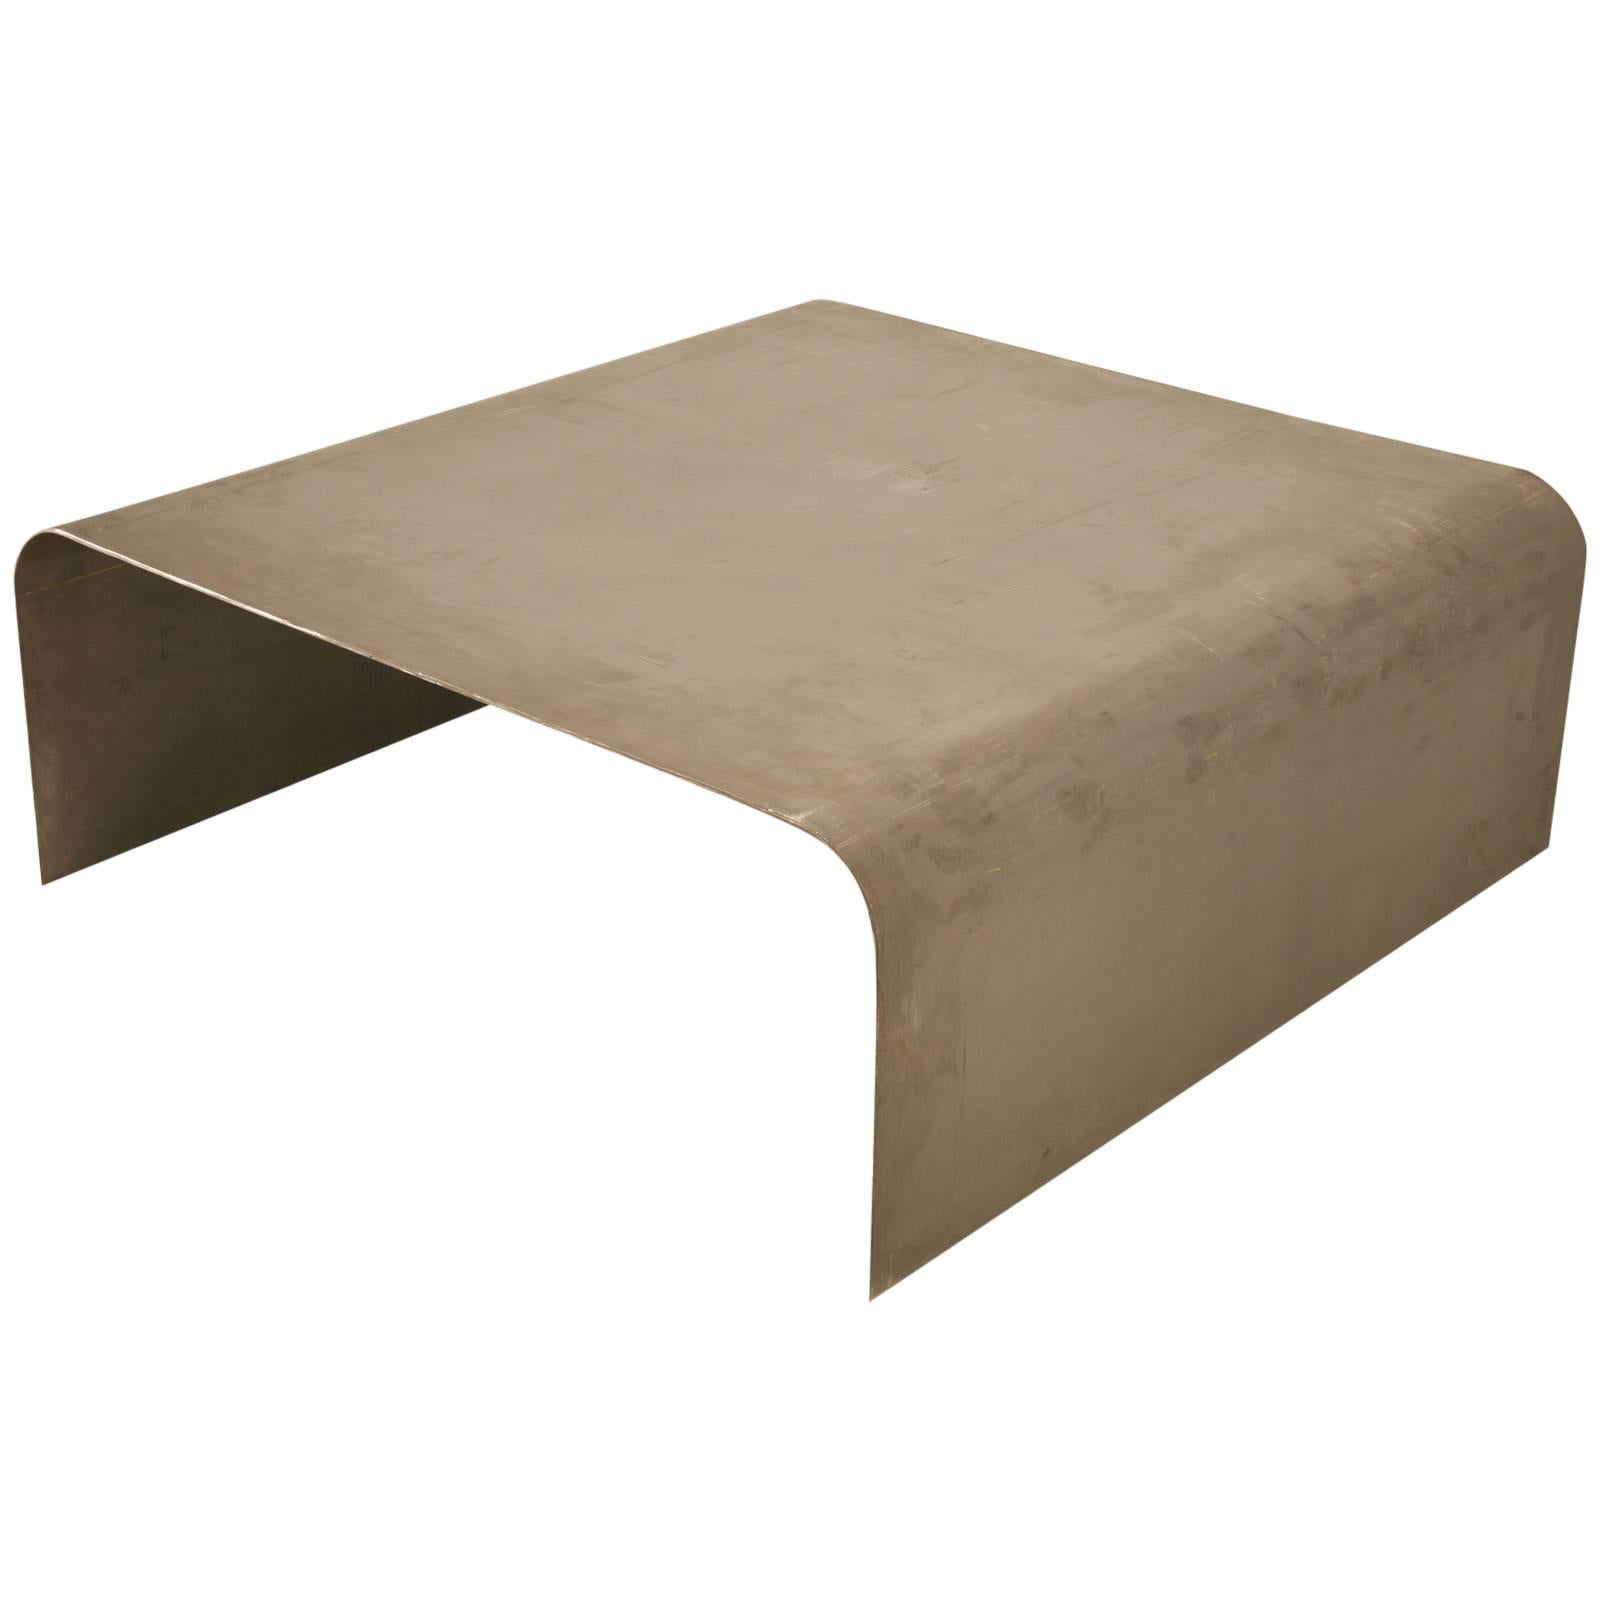 Steel Coffee Table Available in Optional Sizes, Finishes by Old Plank Very Heavy